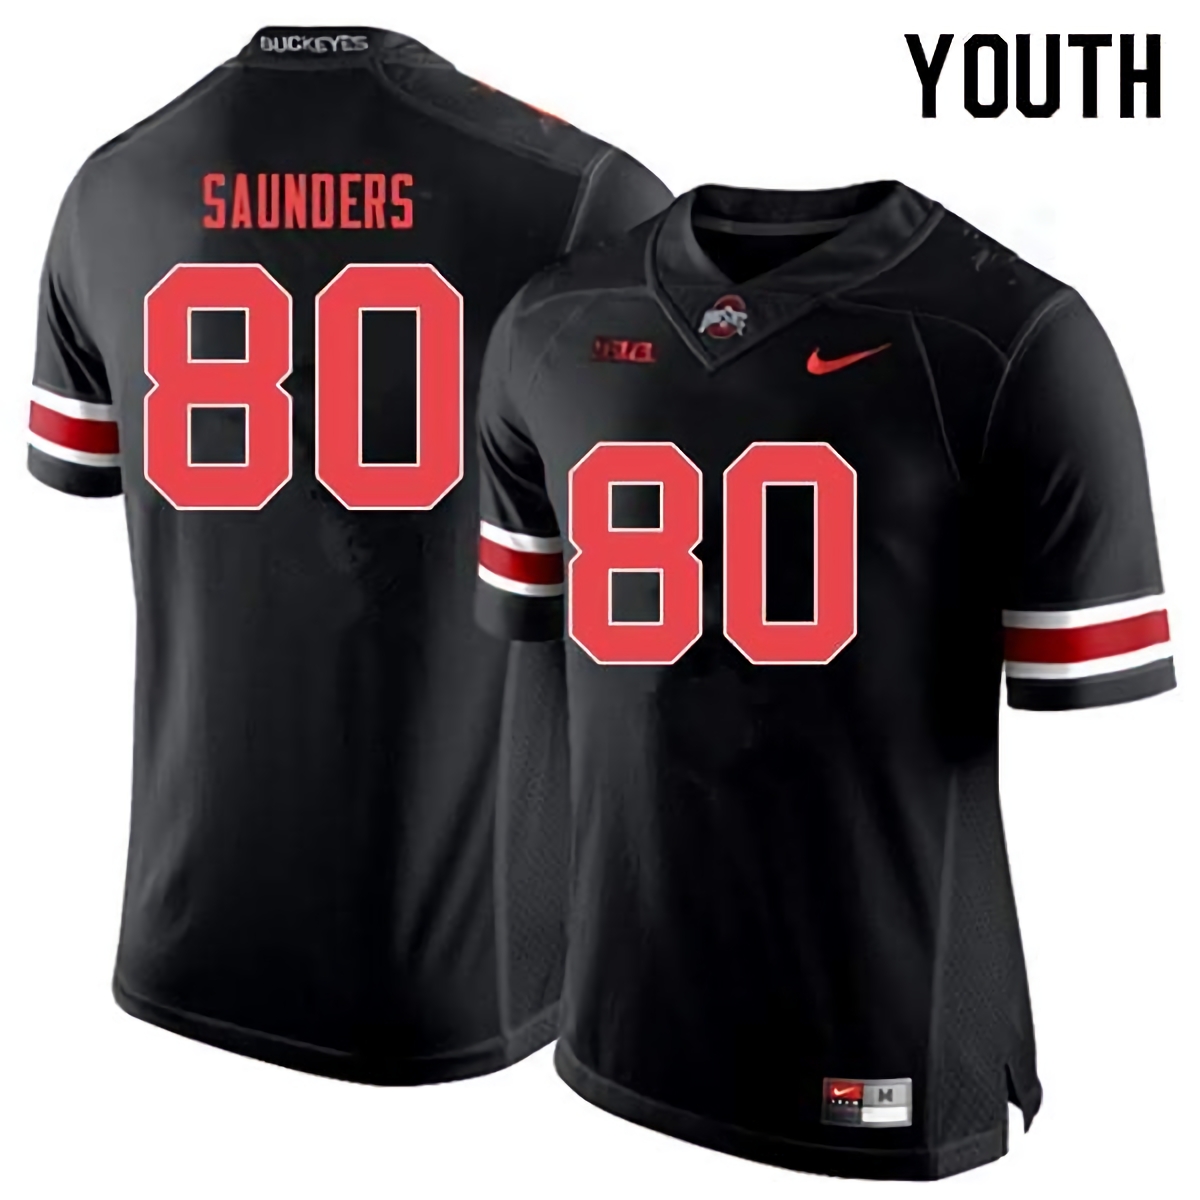 C.J. Saunders Ohio State Buckeyes Youth NCAA #80 Nike Black Out College Stitched Football Jersey QTI3256UB